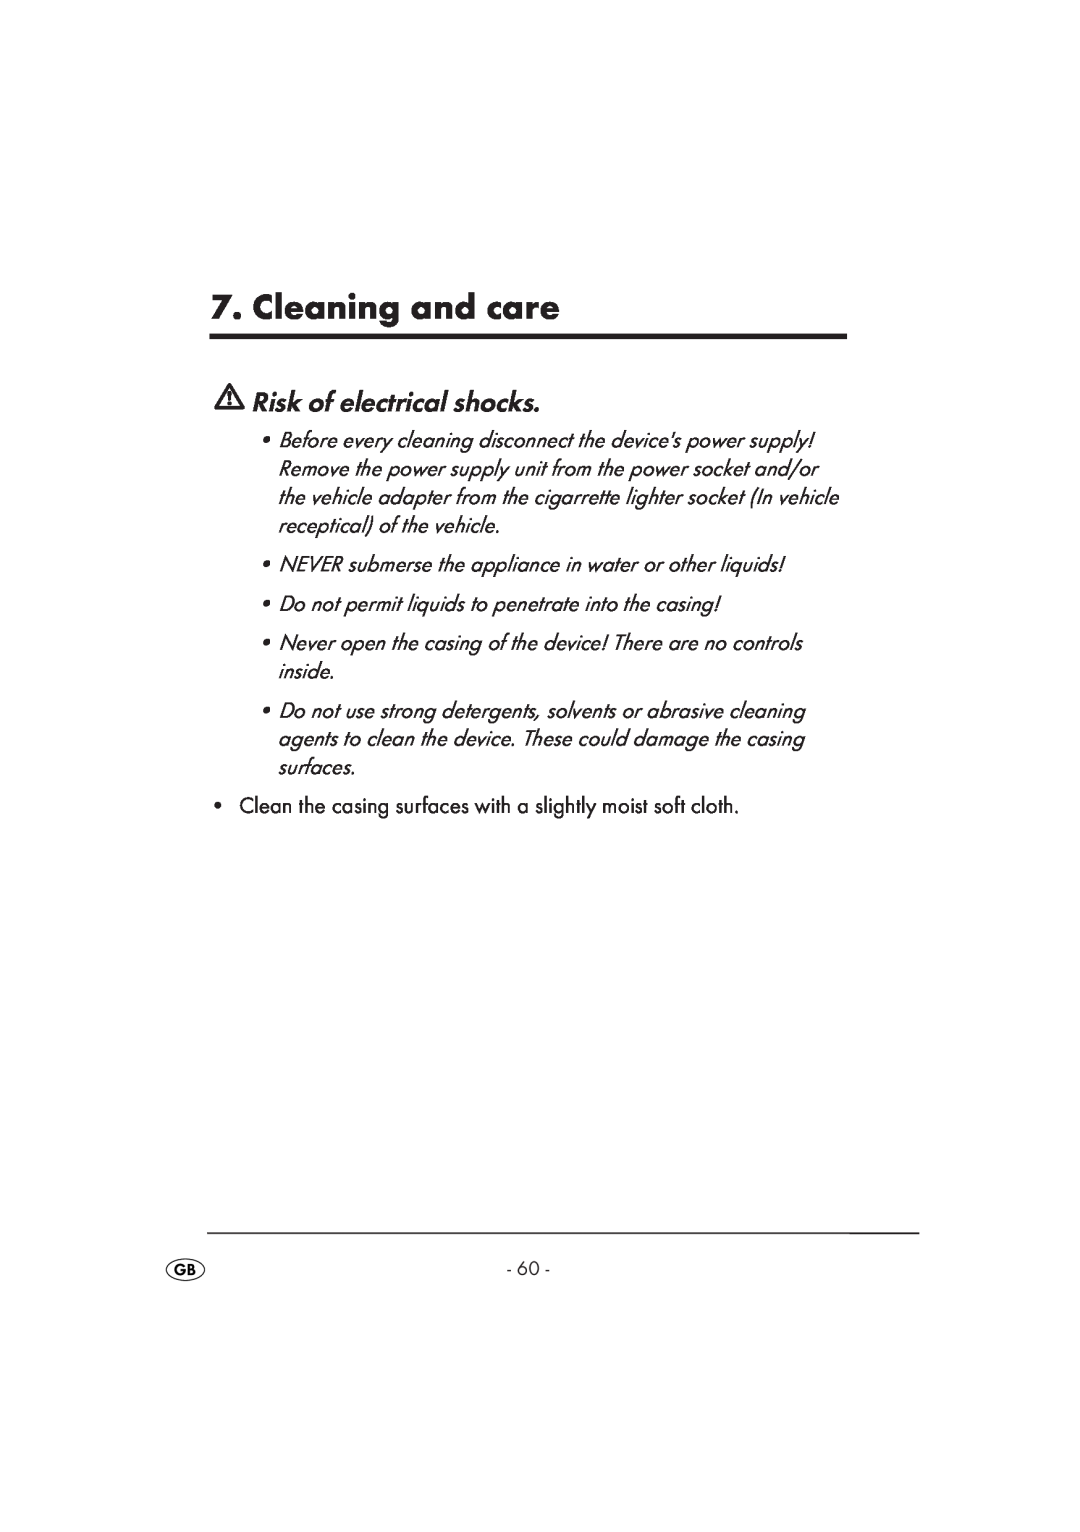 Kompernass KH 2356 manual Cleaning and care, Risk of electrical shocks 